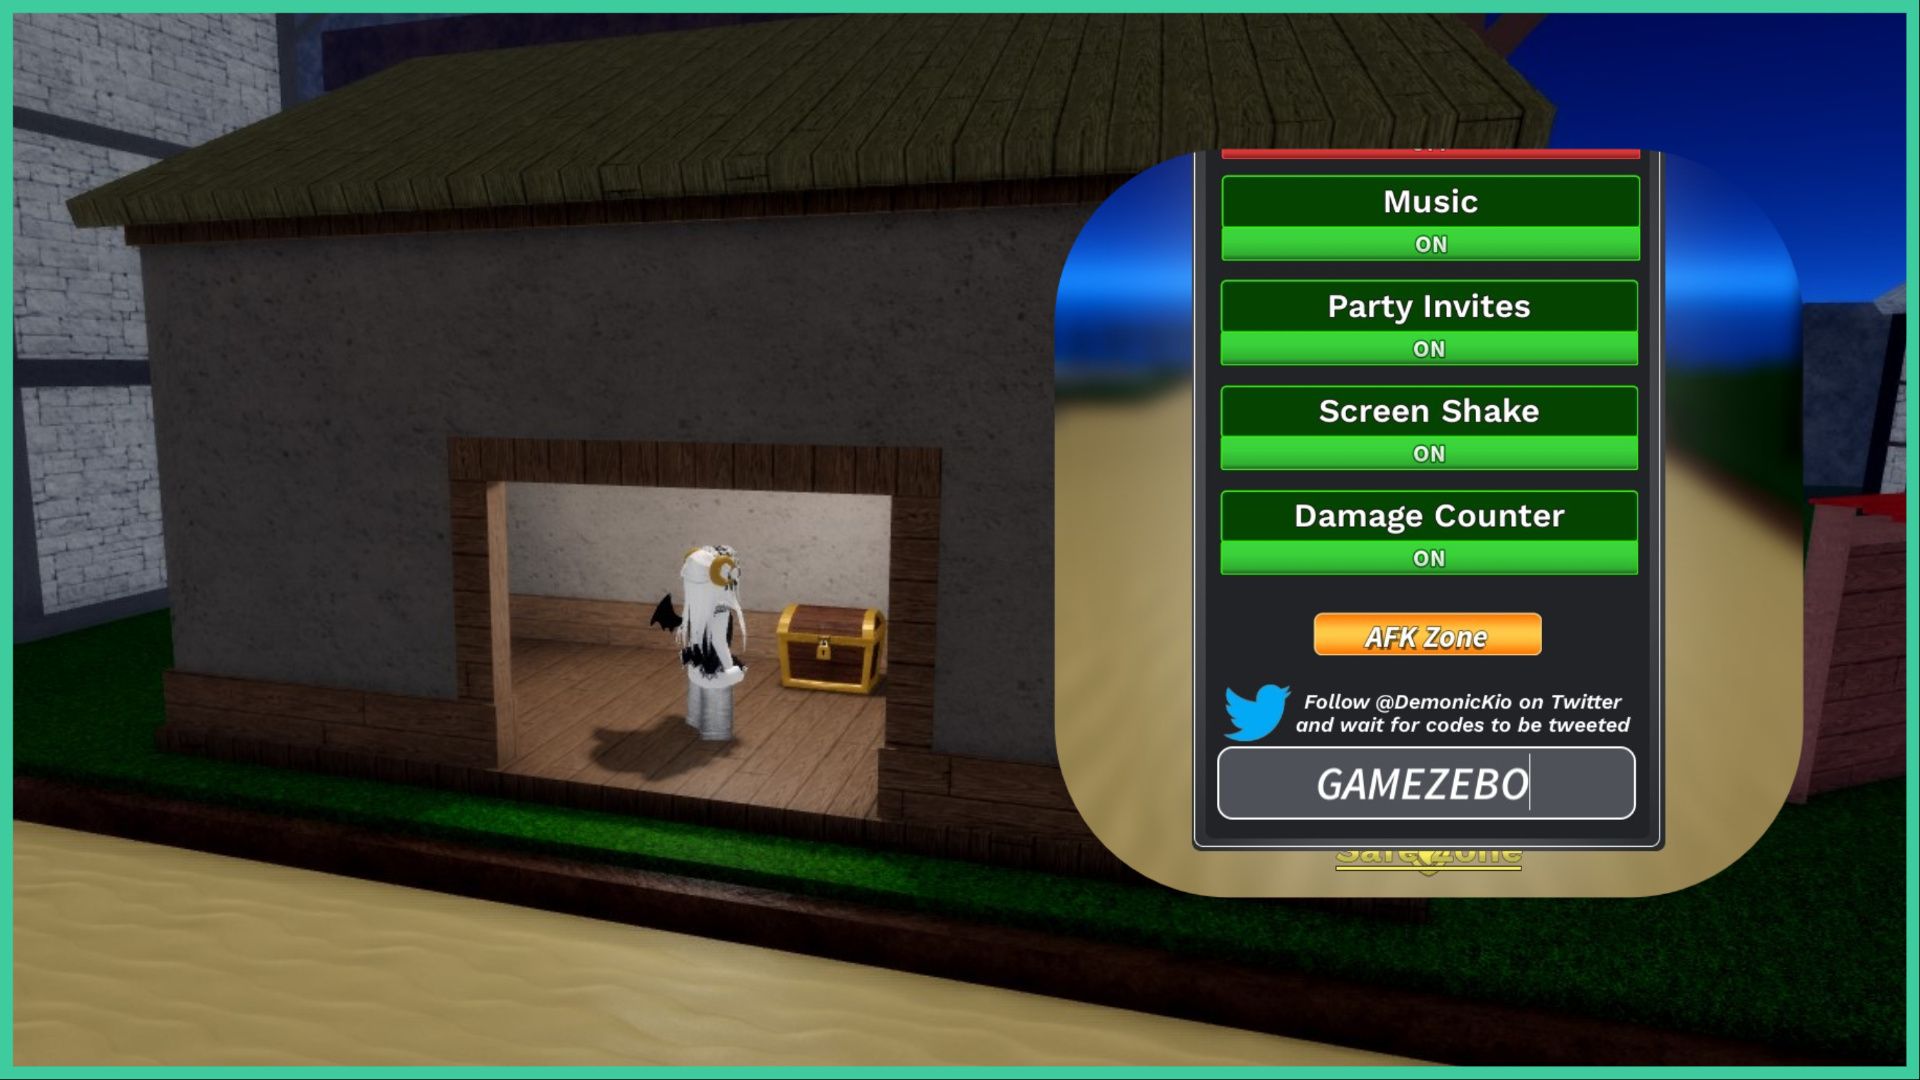 feature image for our demon piece codes, the image is a screenshot of a roblox player standing inside of a small building with a treasure chest inside, there is also a small screenshot added on top of the settings window that has the code redemption box filled out with the word 'gamezebo'